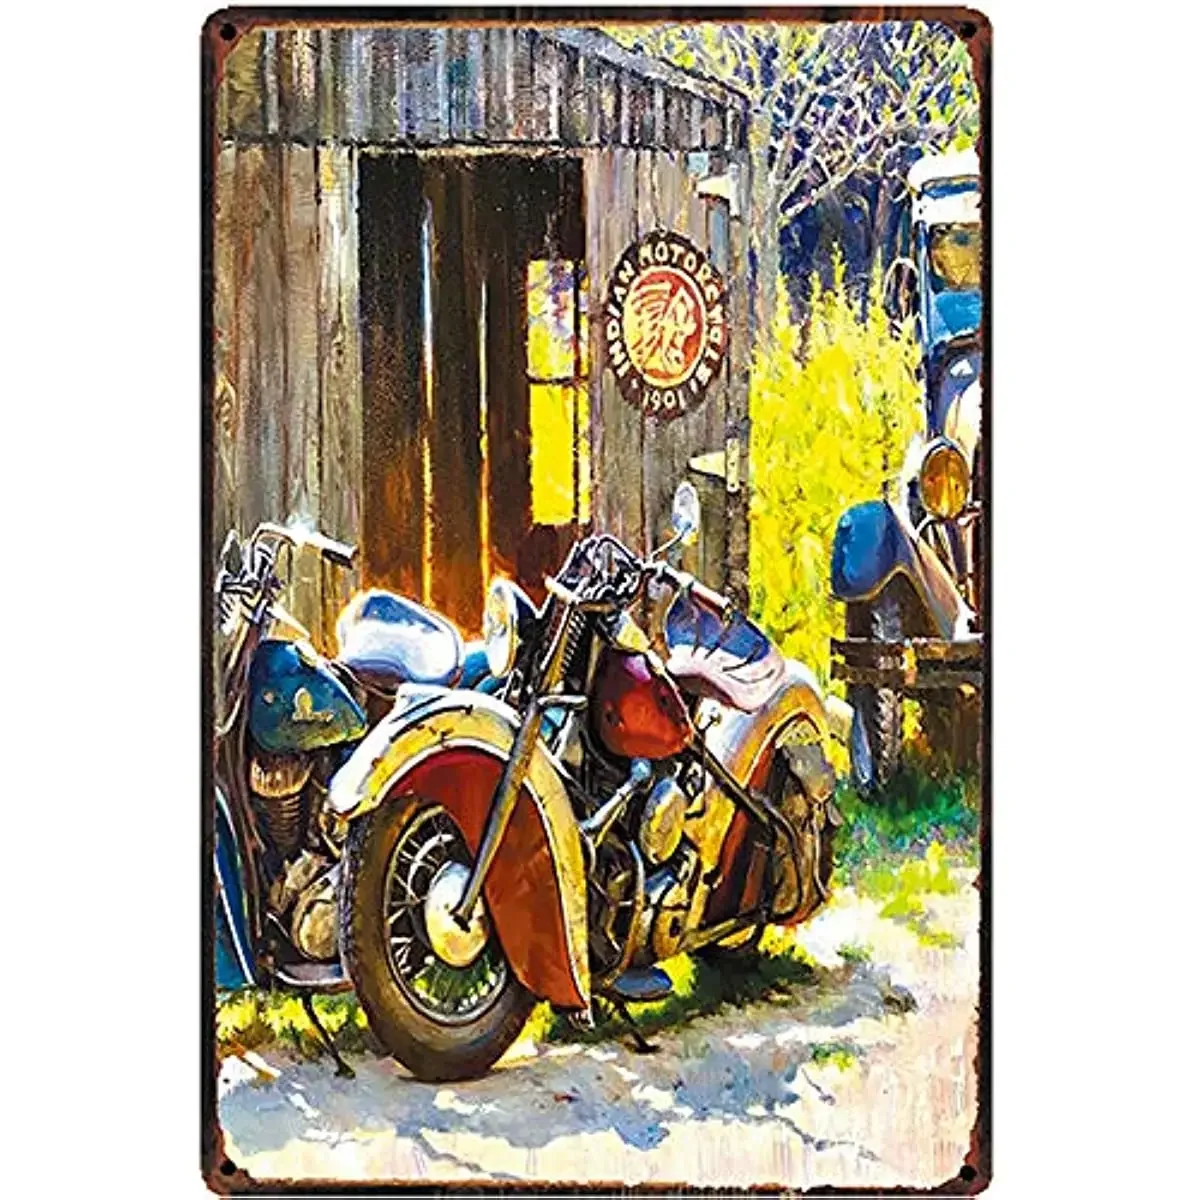 

Nostalgic Original Retro Design Motorcycle Shed Tin Metal Signs Wall Art，Thick Tinplate Print Poster Wall Decoration for Garage